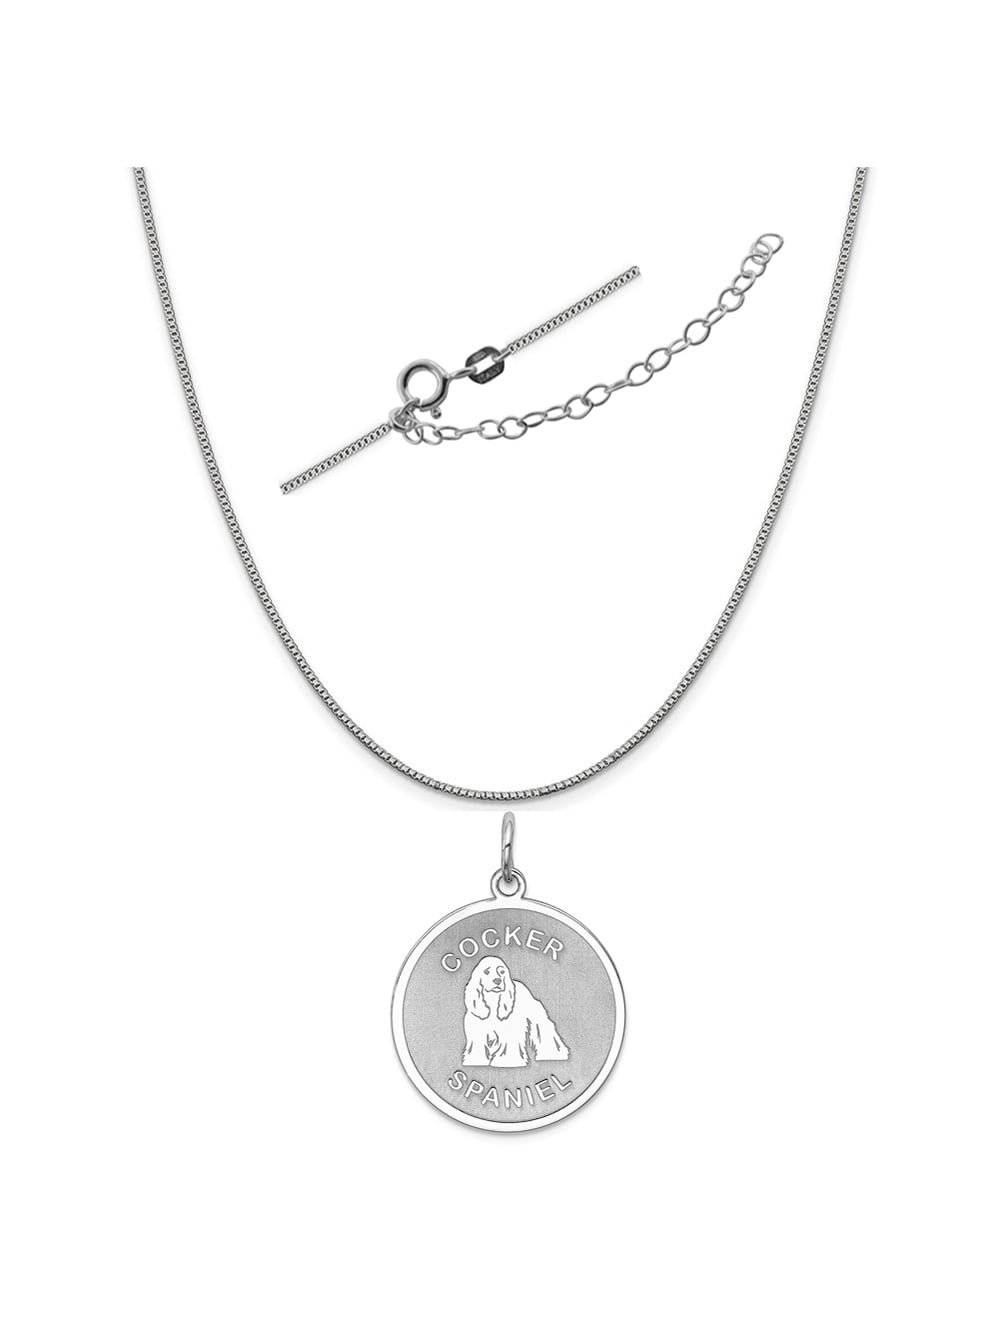 Sterling Silver Anti-Tarnish Treated Cocker Spaniel Disc Charm on an Adjustable Chain Necklace 